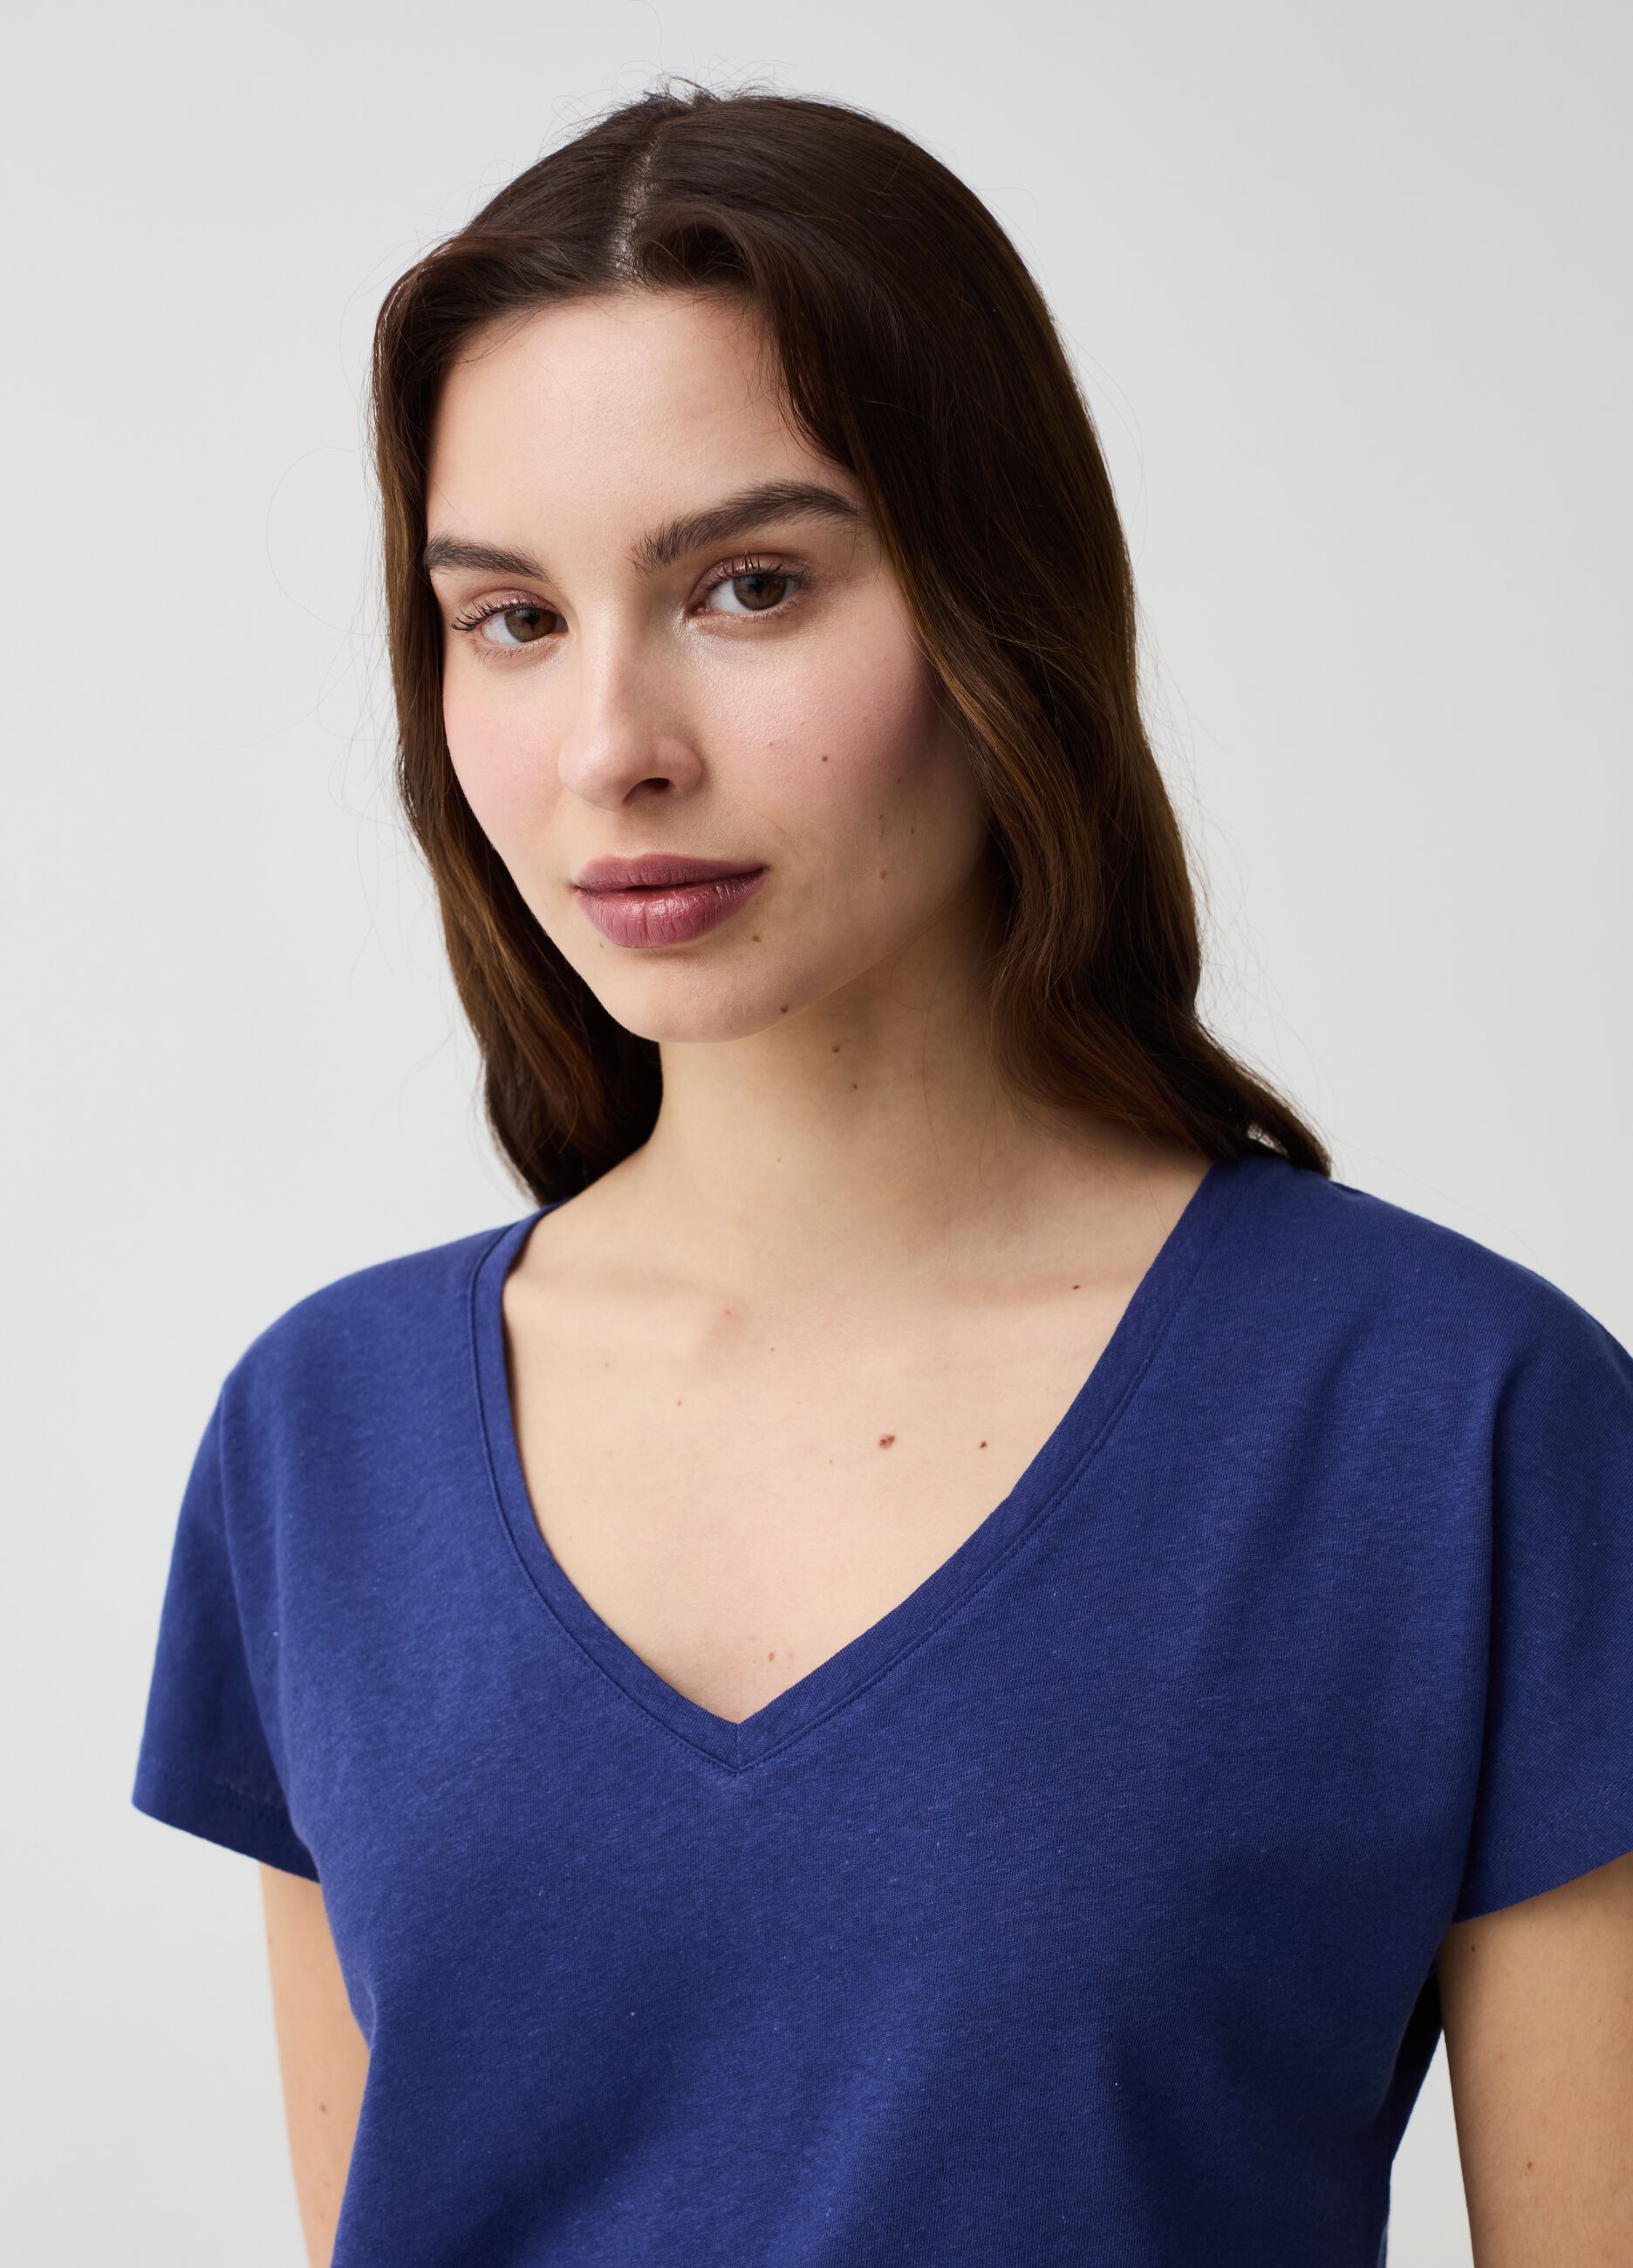 Linen and cotton T-shirt with V neck